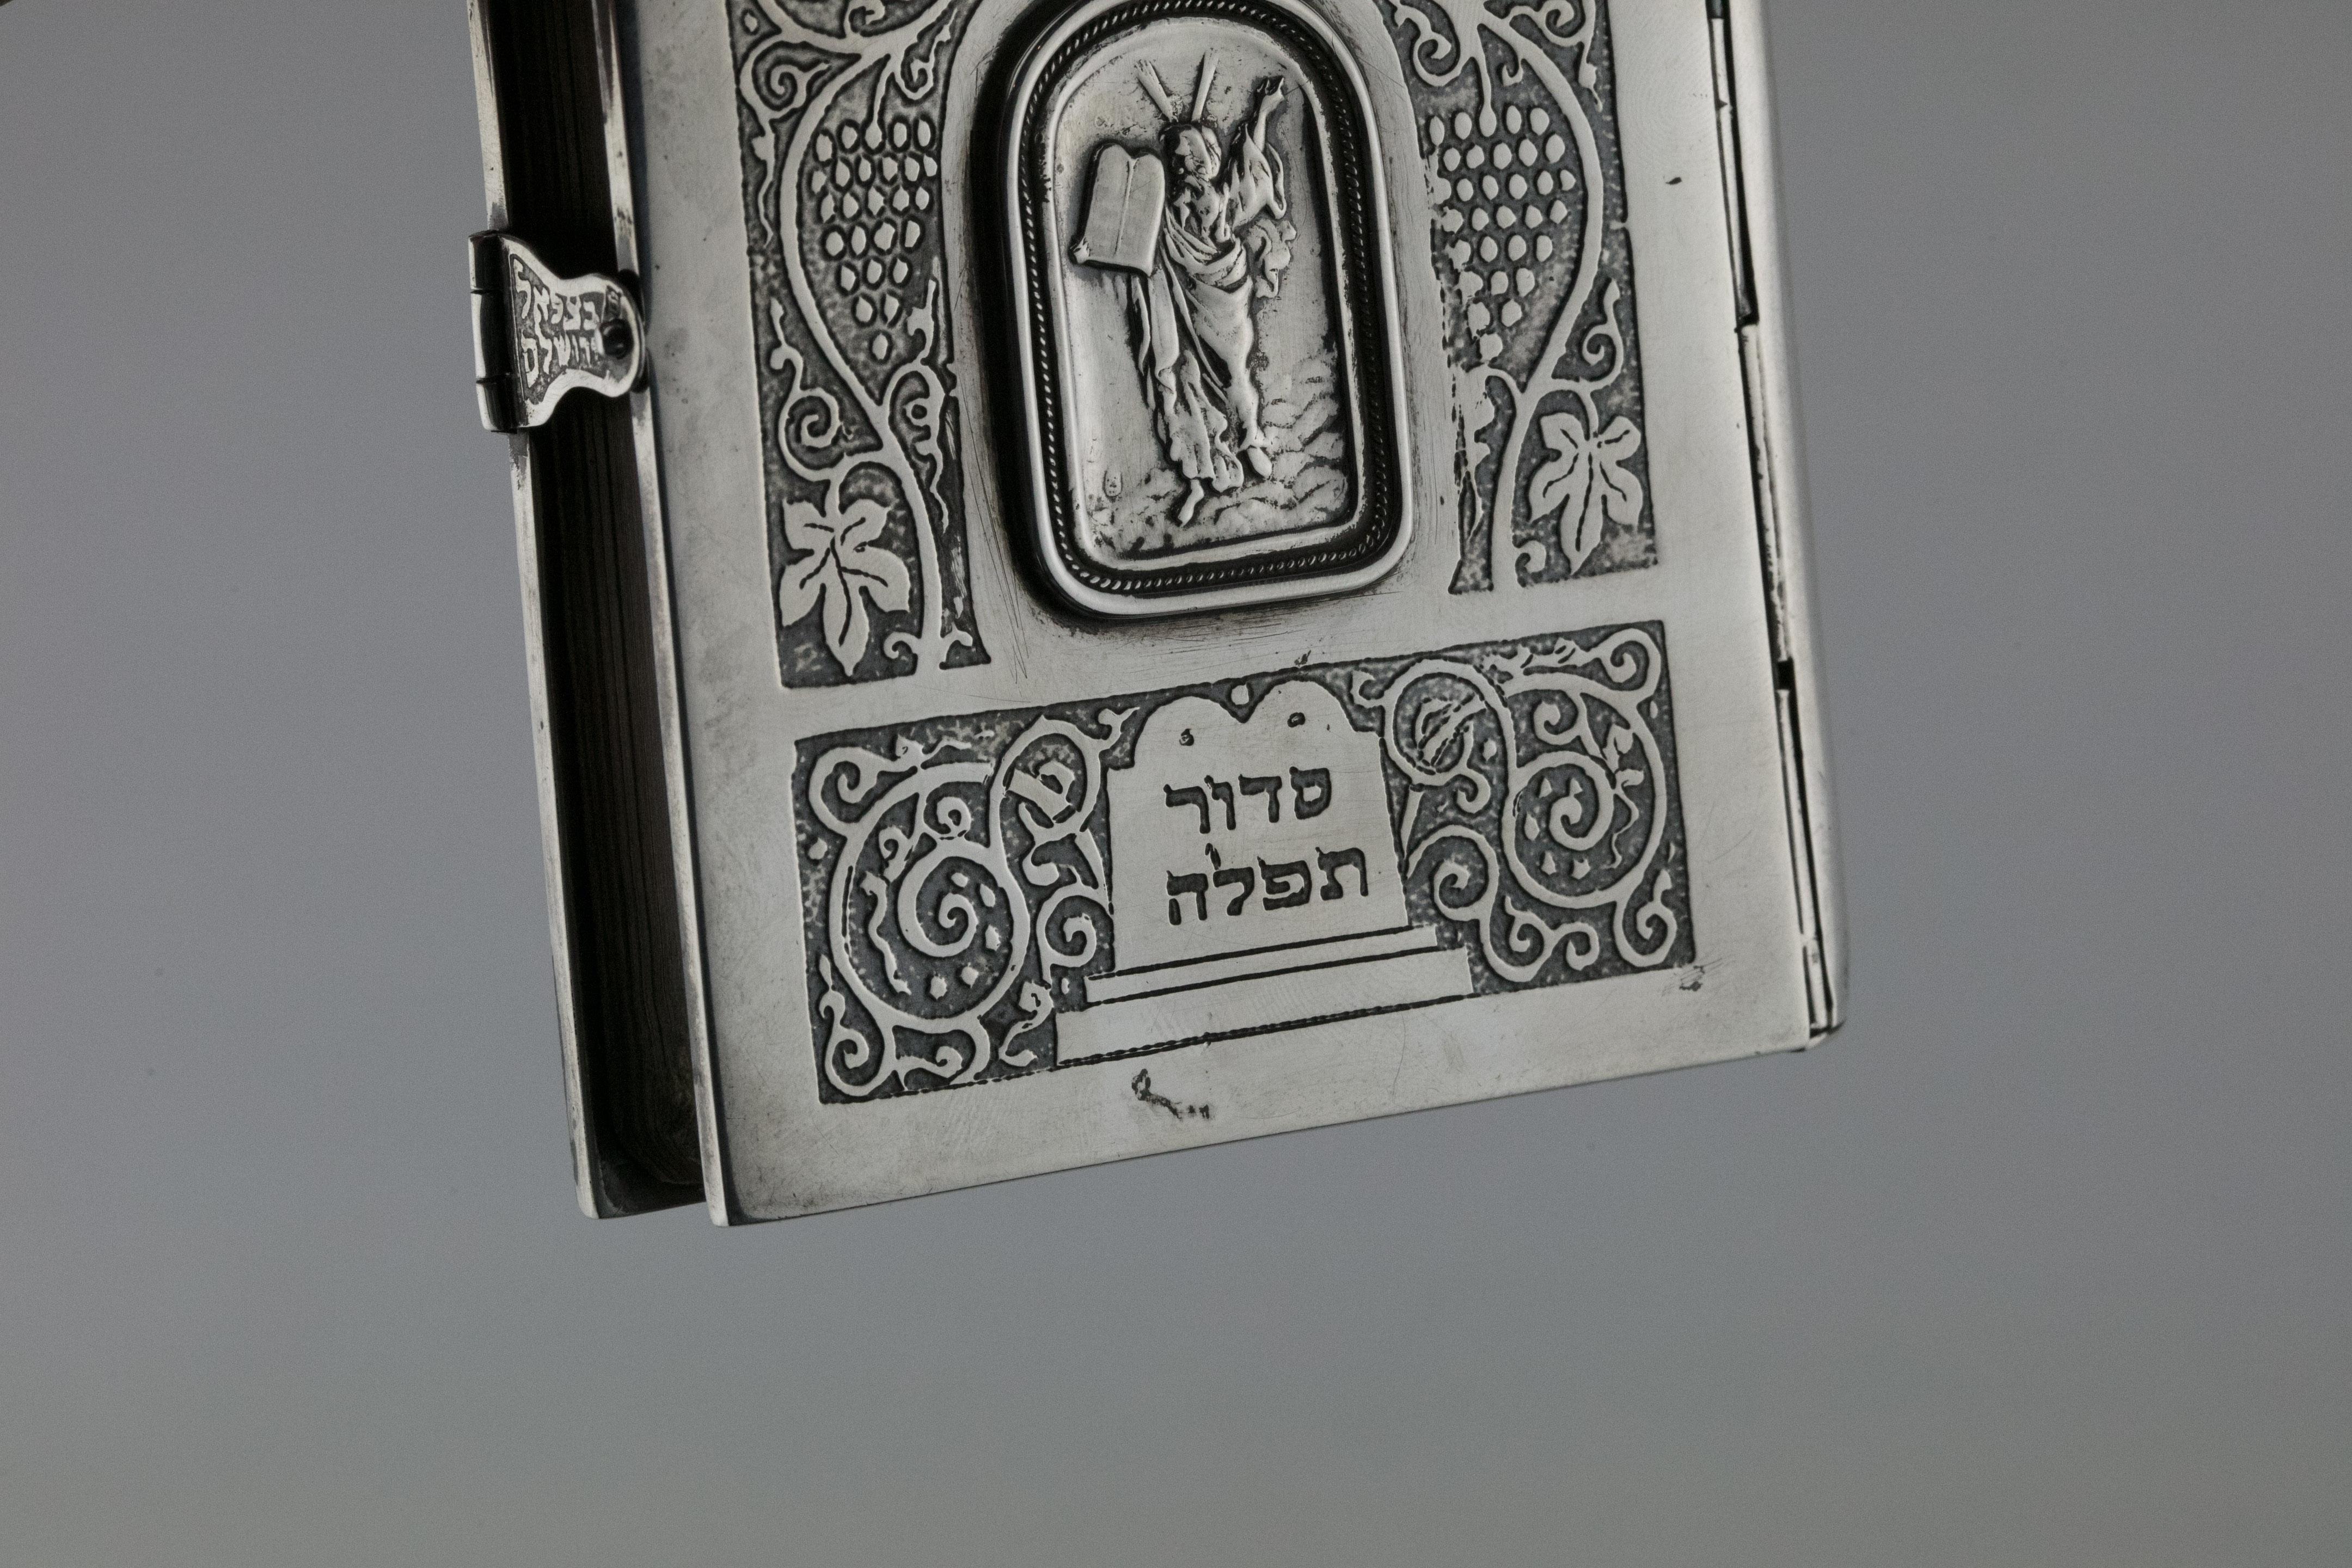 Etched Mid-20th Century Siddur with Silver Book Binding by Bezalel School Jerusalem